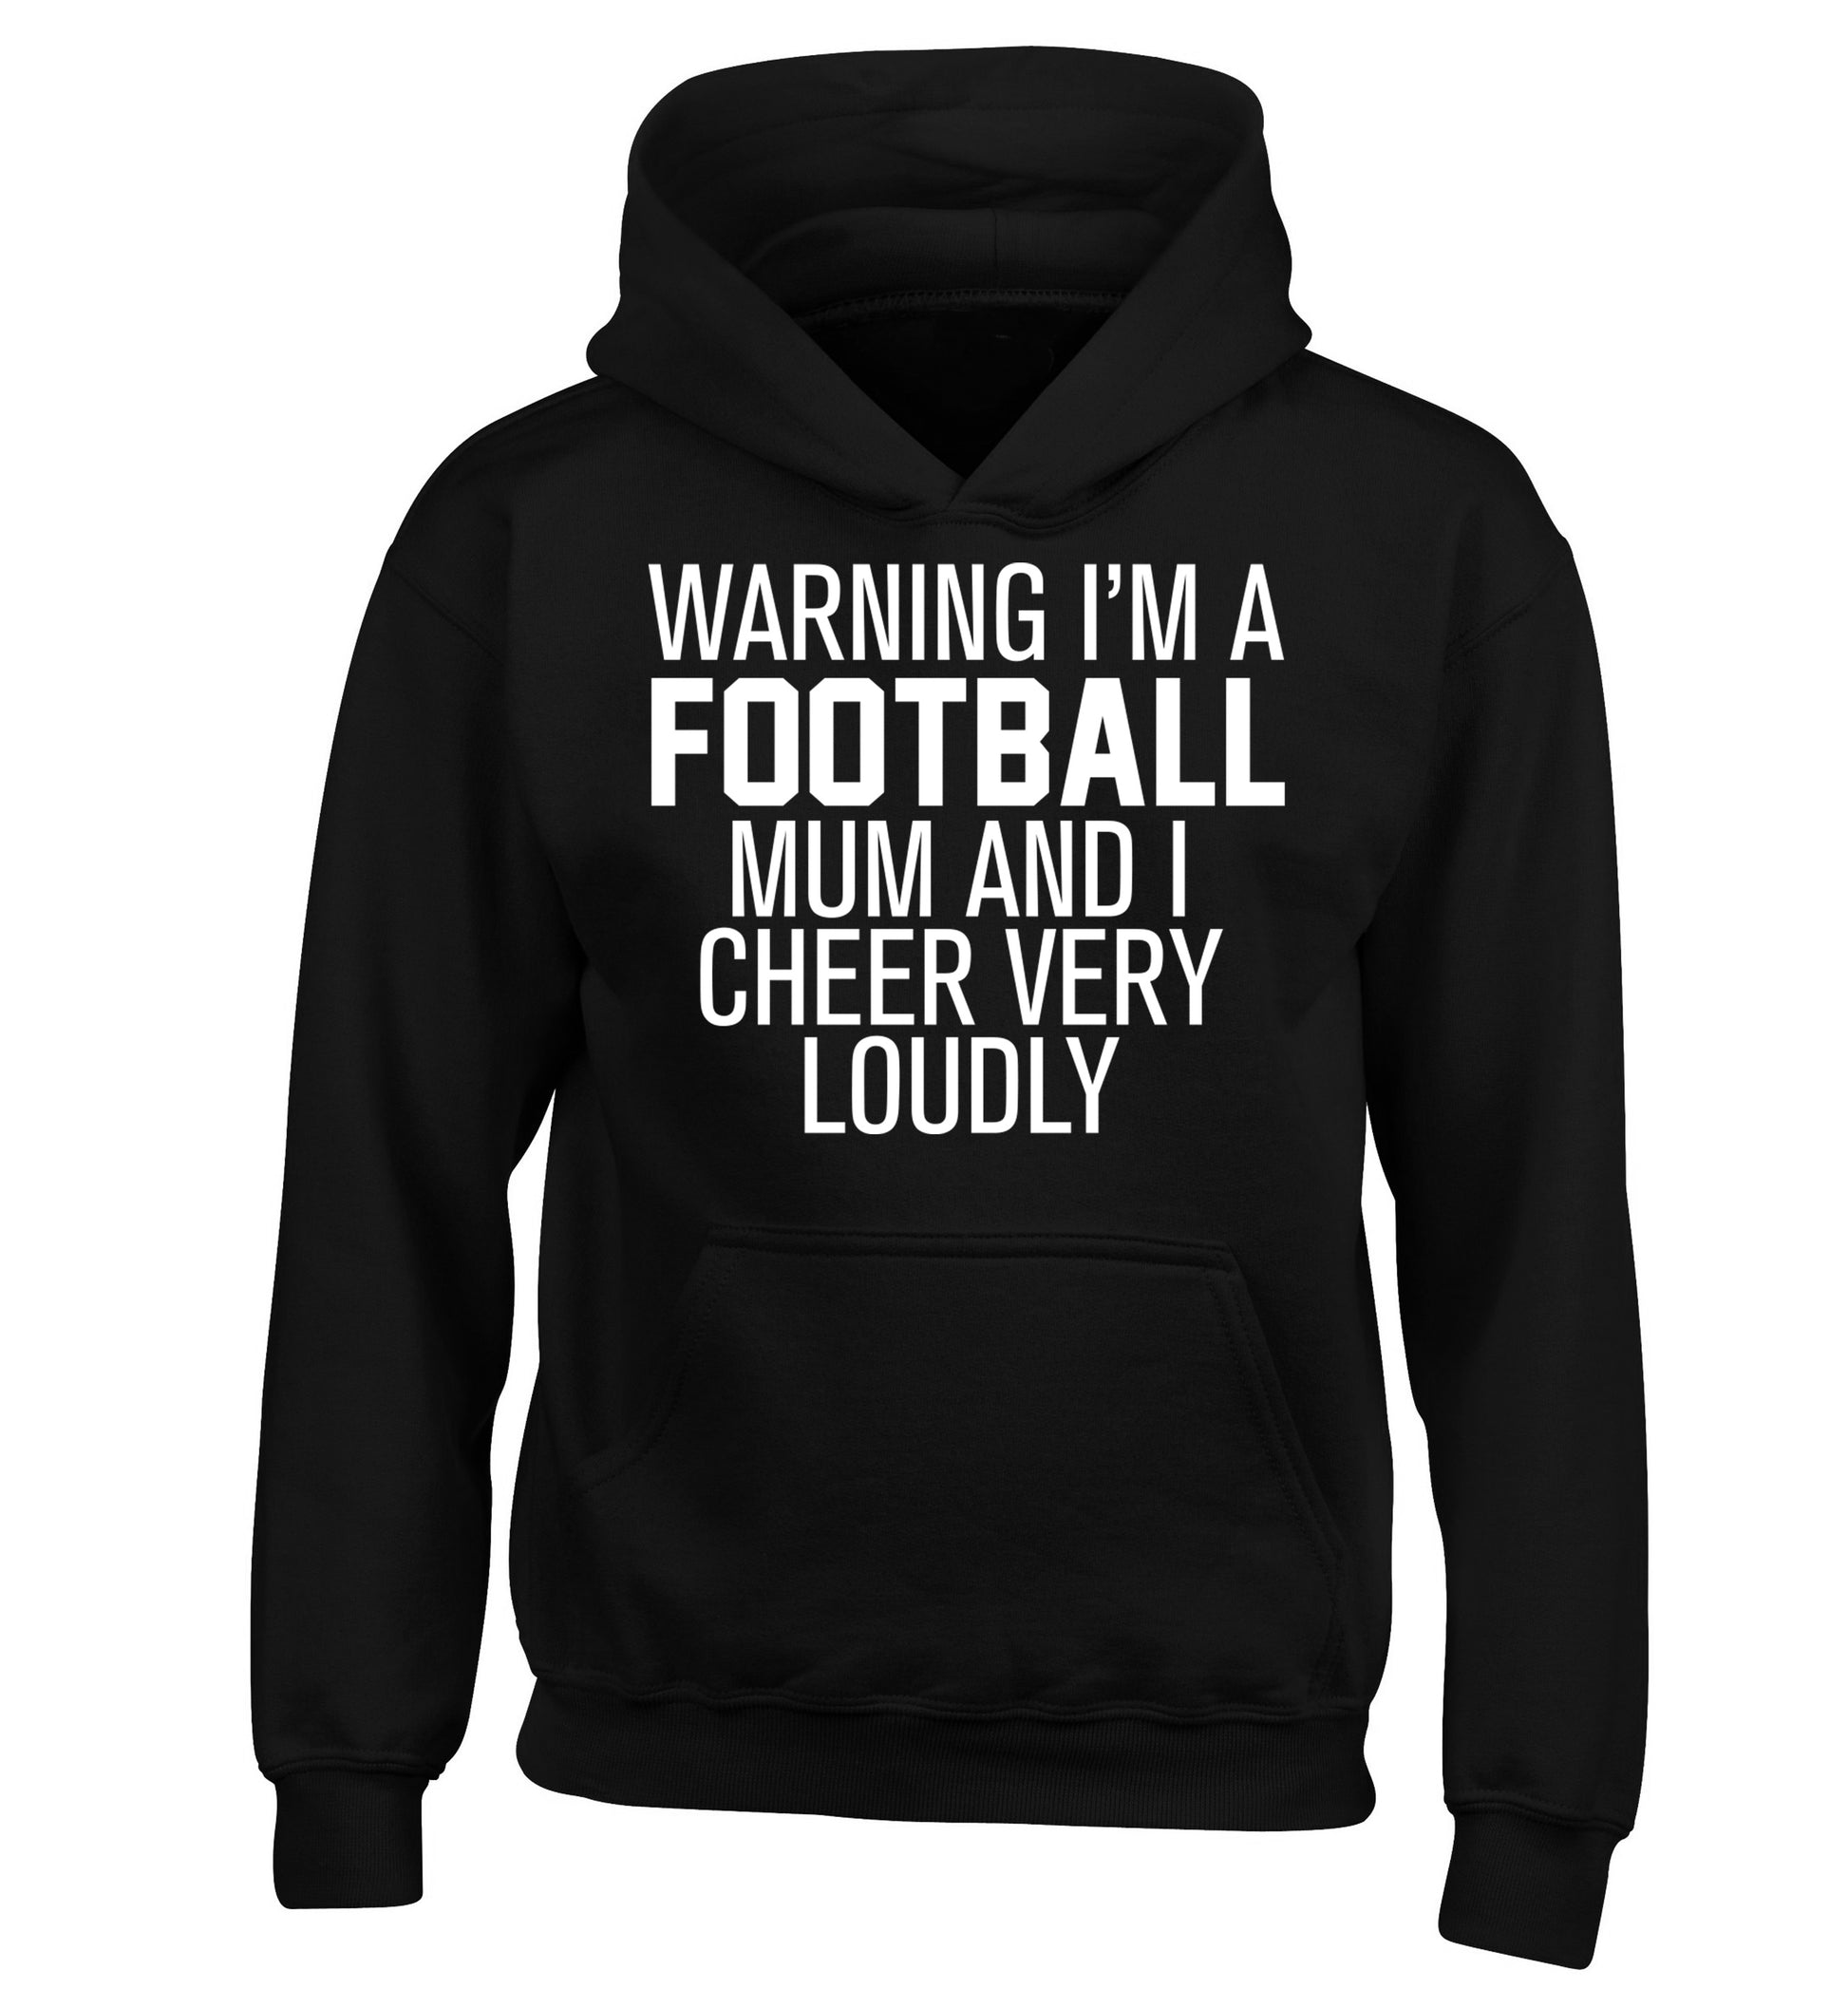 Warning I'm a football mum and I cheer very loudly children's black hoodie 12-14 Years